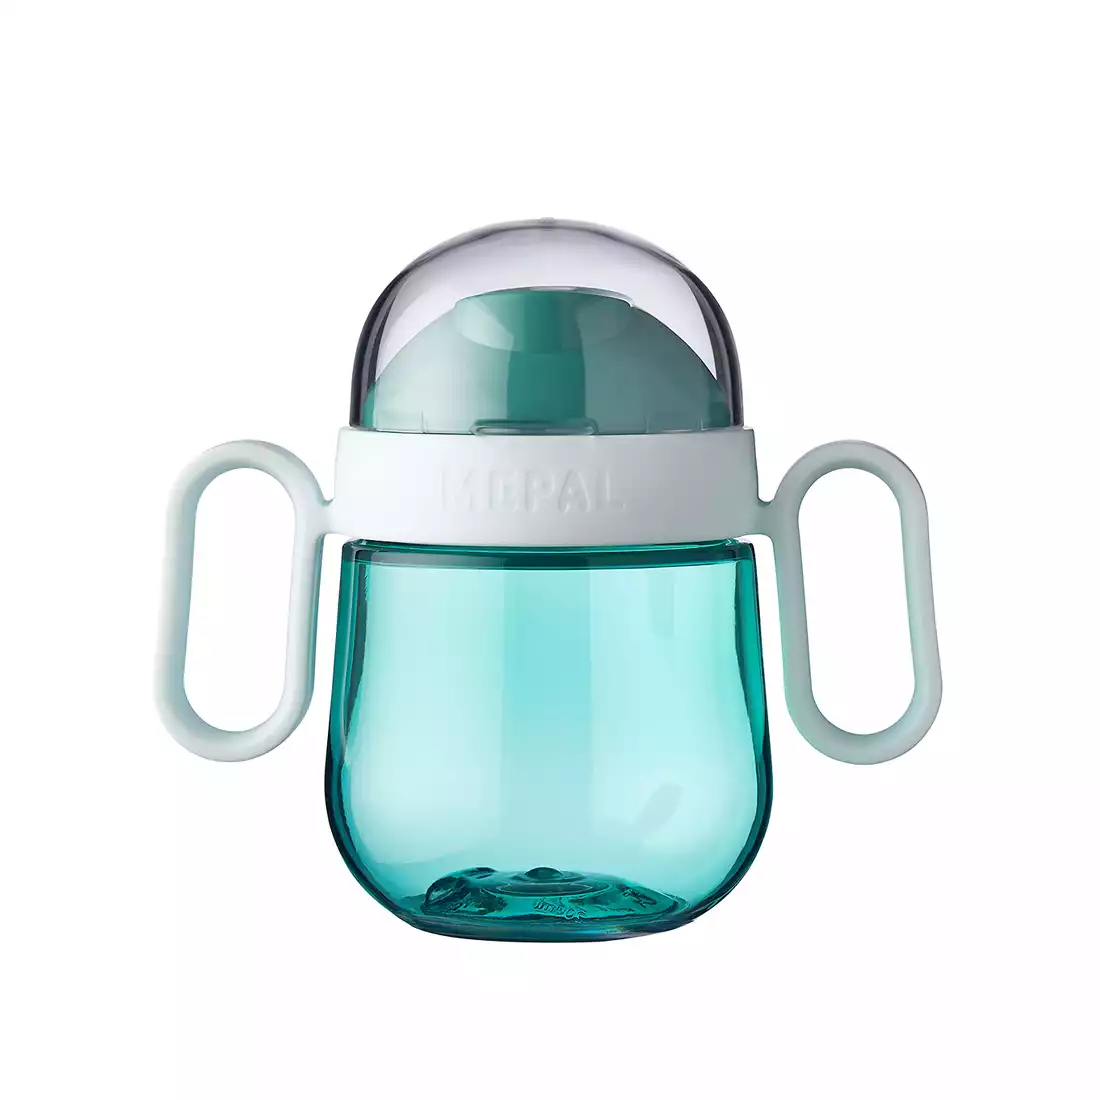 MEPAL MIO non-spill cup 200 ml, deep turquoise